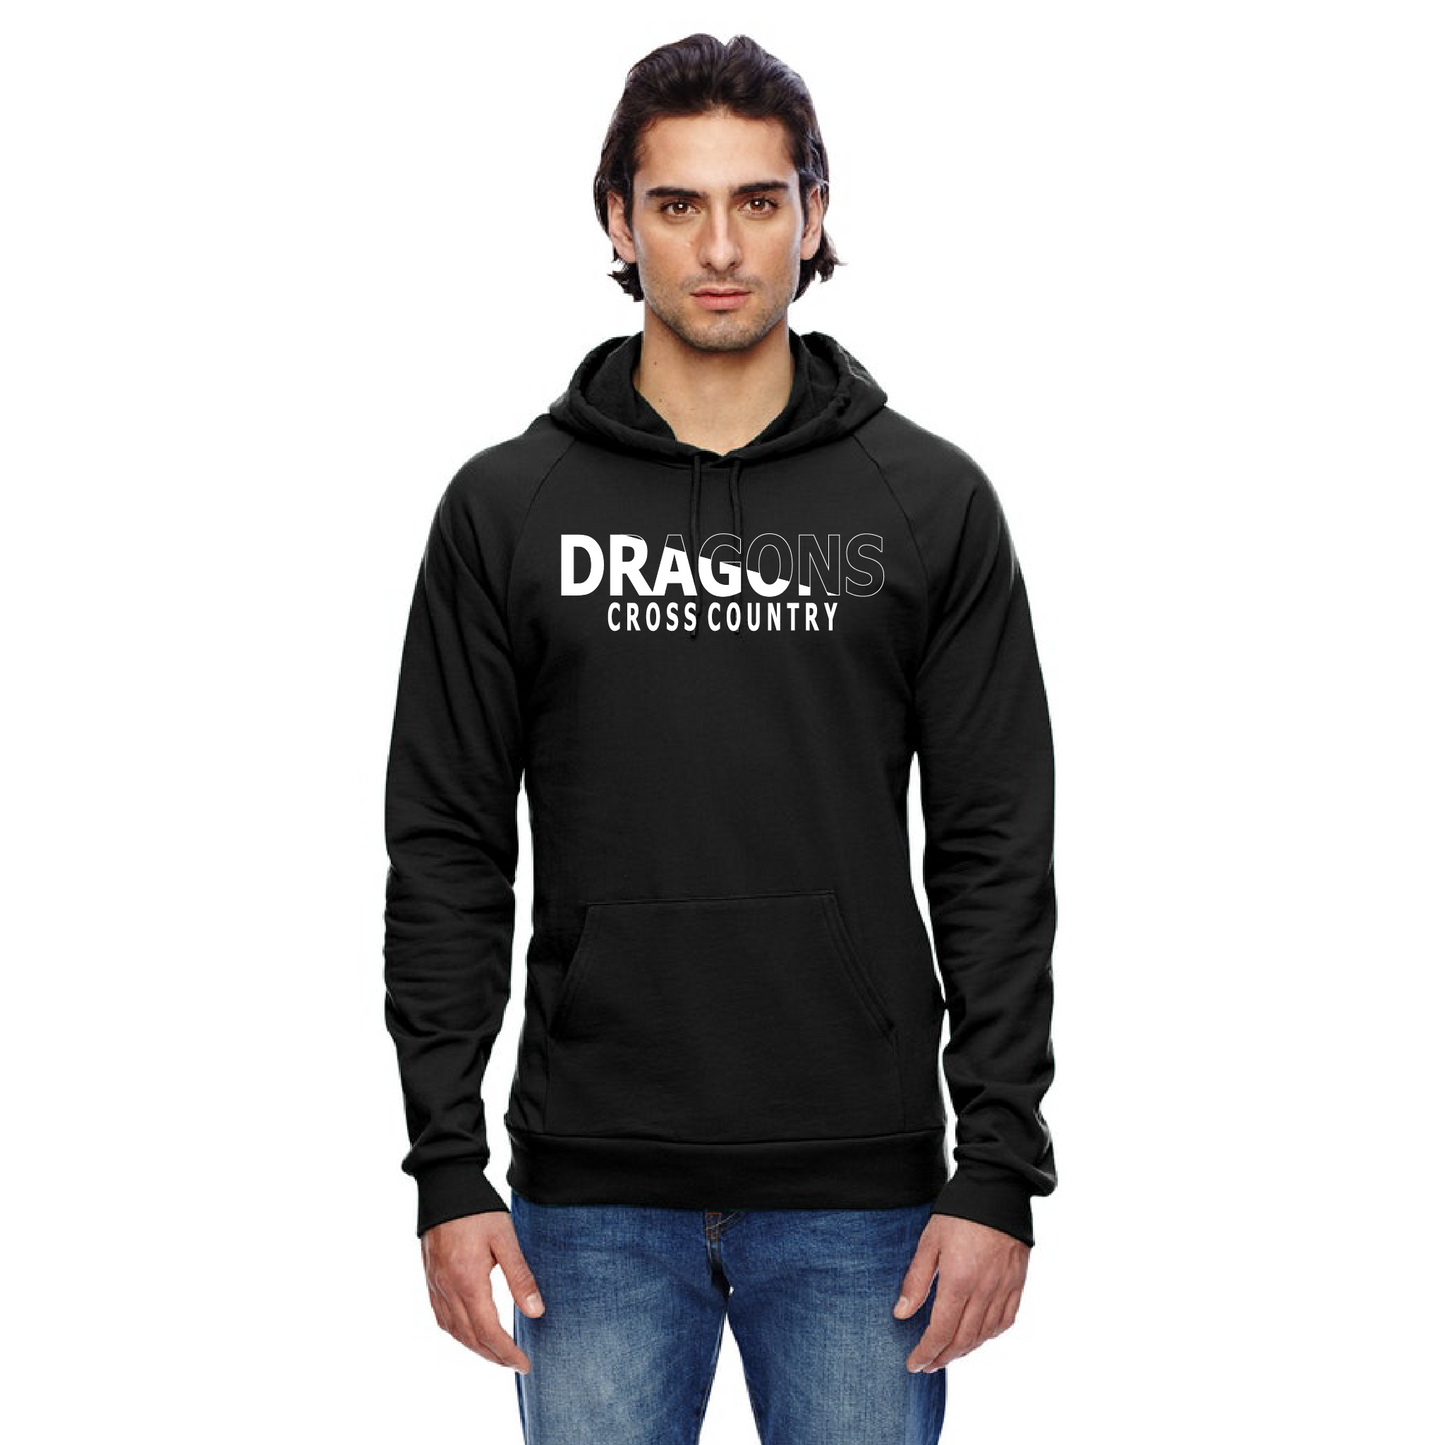 Unisex Hoodie - Dragons Cross Country Slashed White